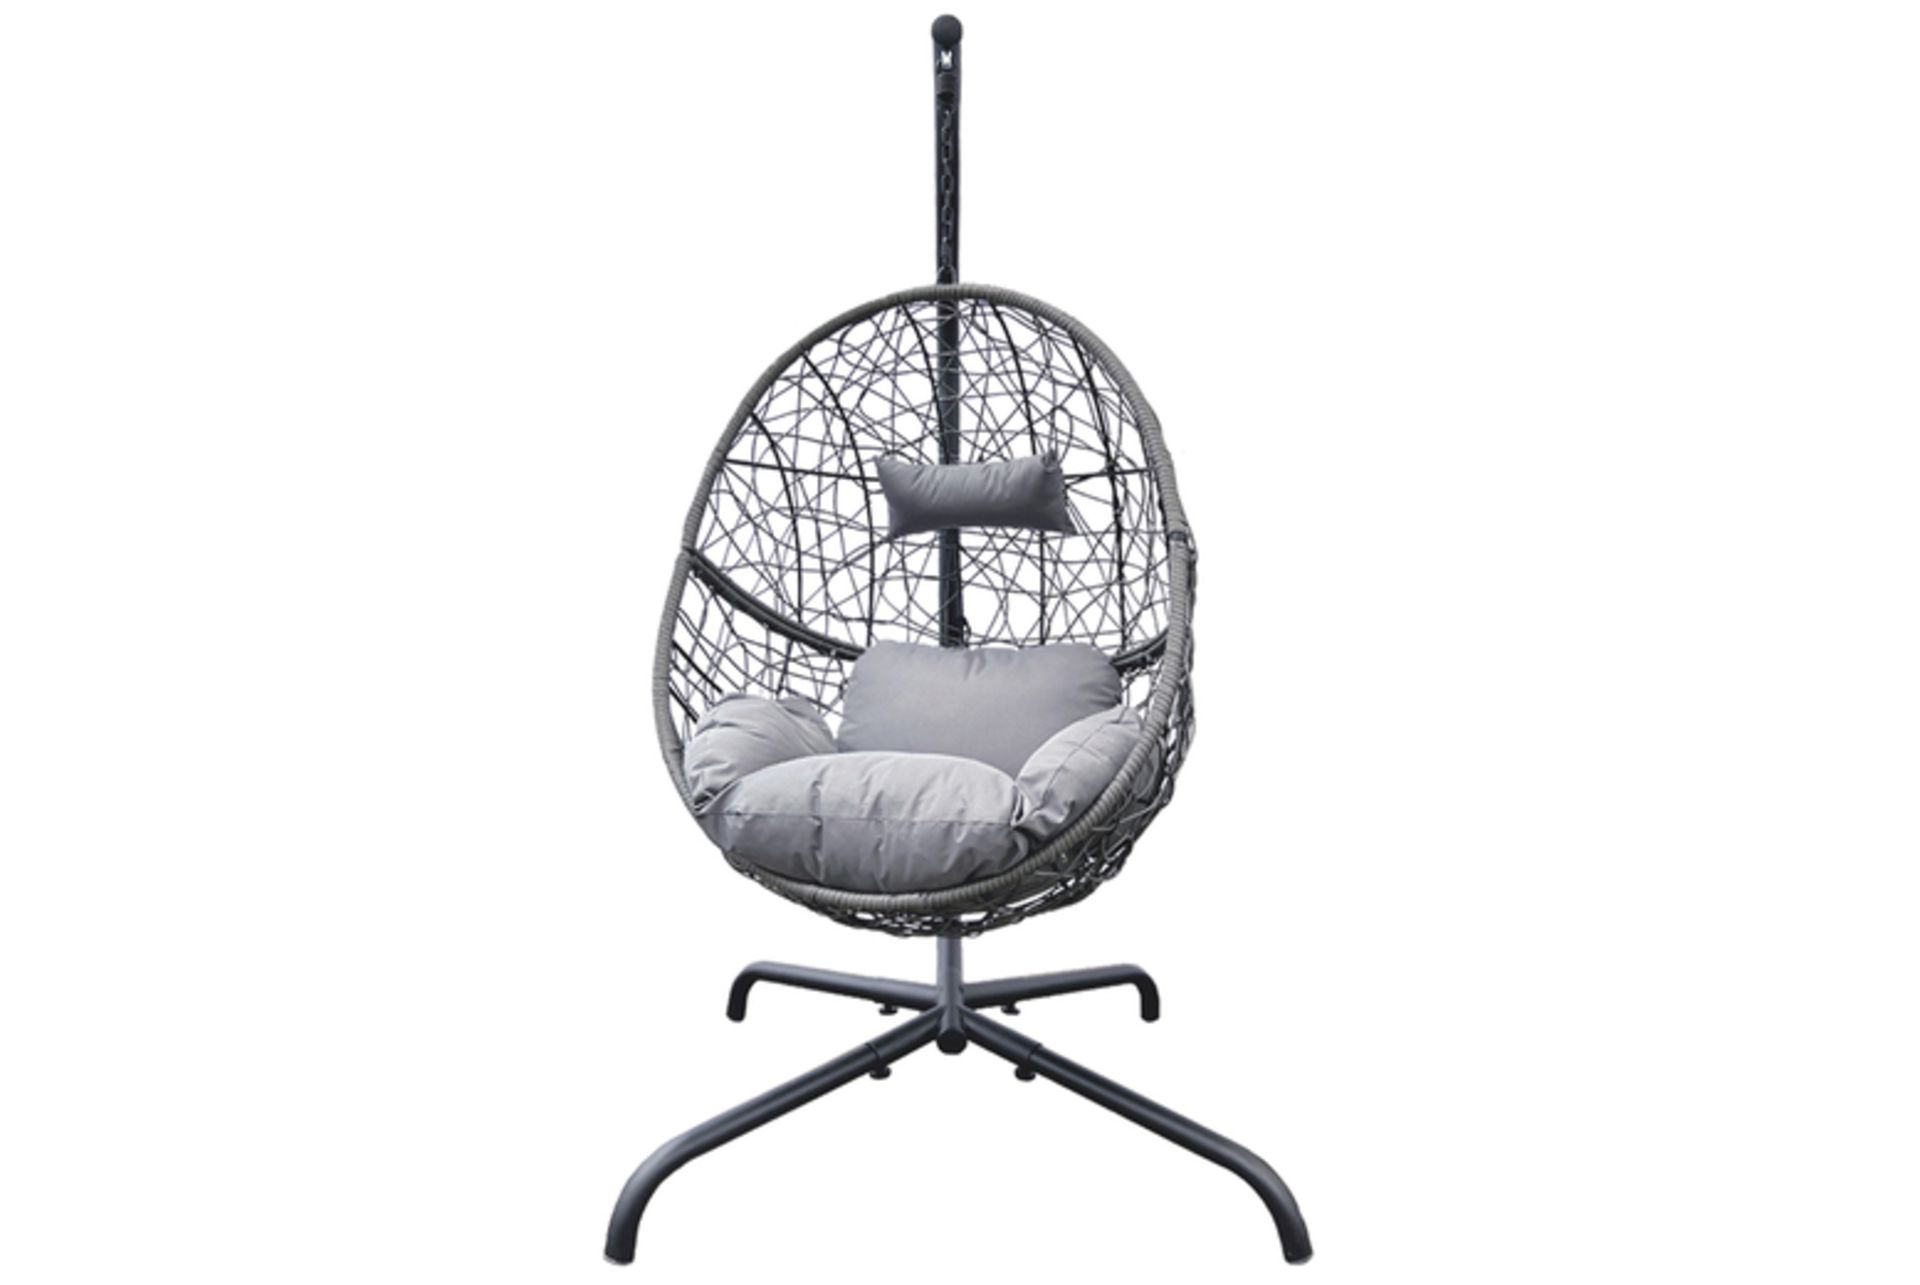 Free Delivery - New Rattan Hanging Egg Chair With A Cushion and Pillow - Grey - Image 2 of 2